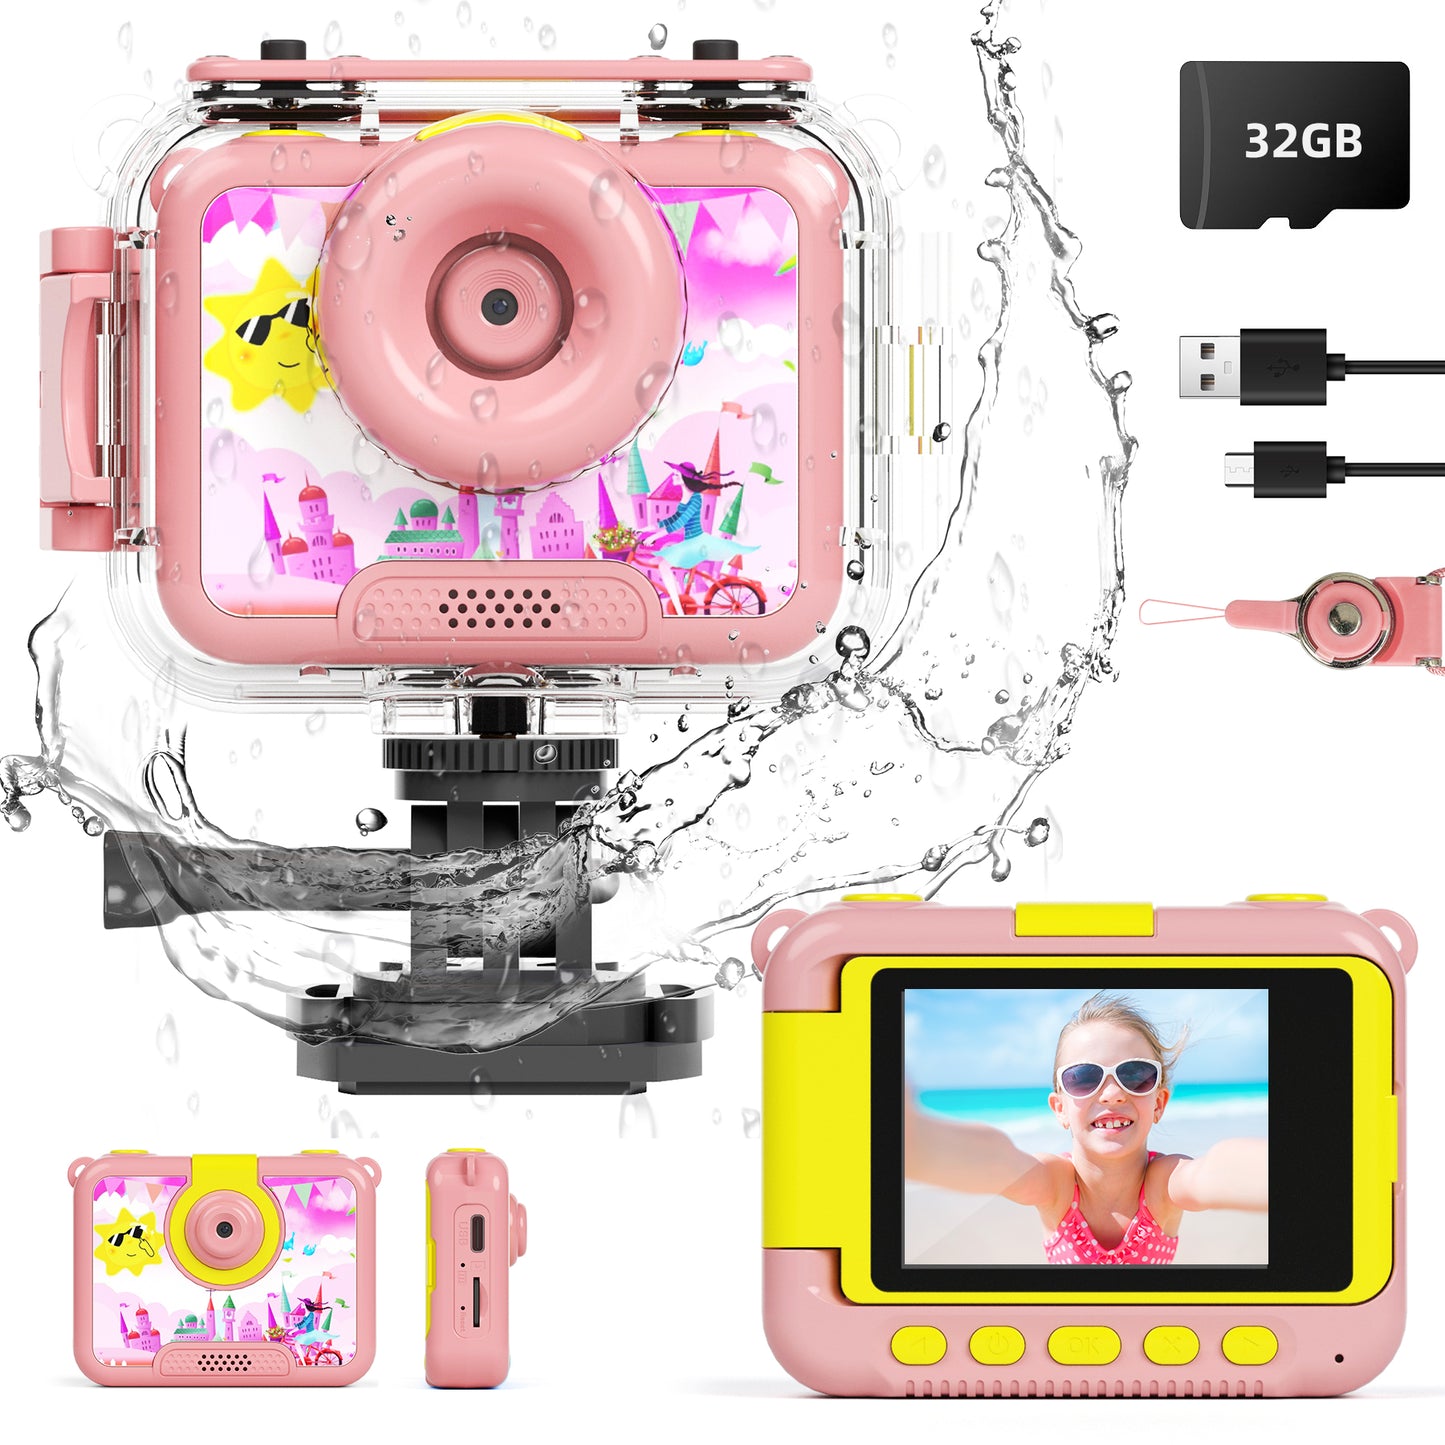 XJD Kids Digital Camera Waterproof, Birthday Gifts for Girls Age 3-9, 180 Rotatable 1080P HD Digital Action Cameras , Girl Gift Camera with 32GB SD Card - Pink